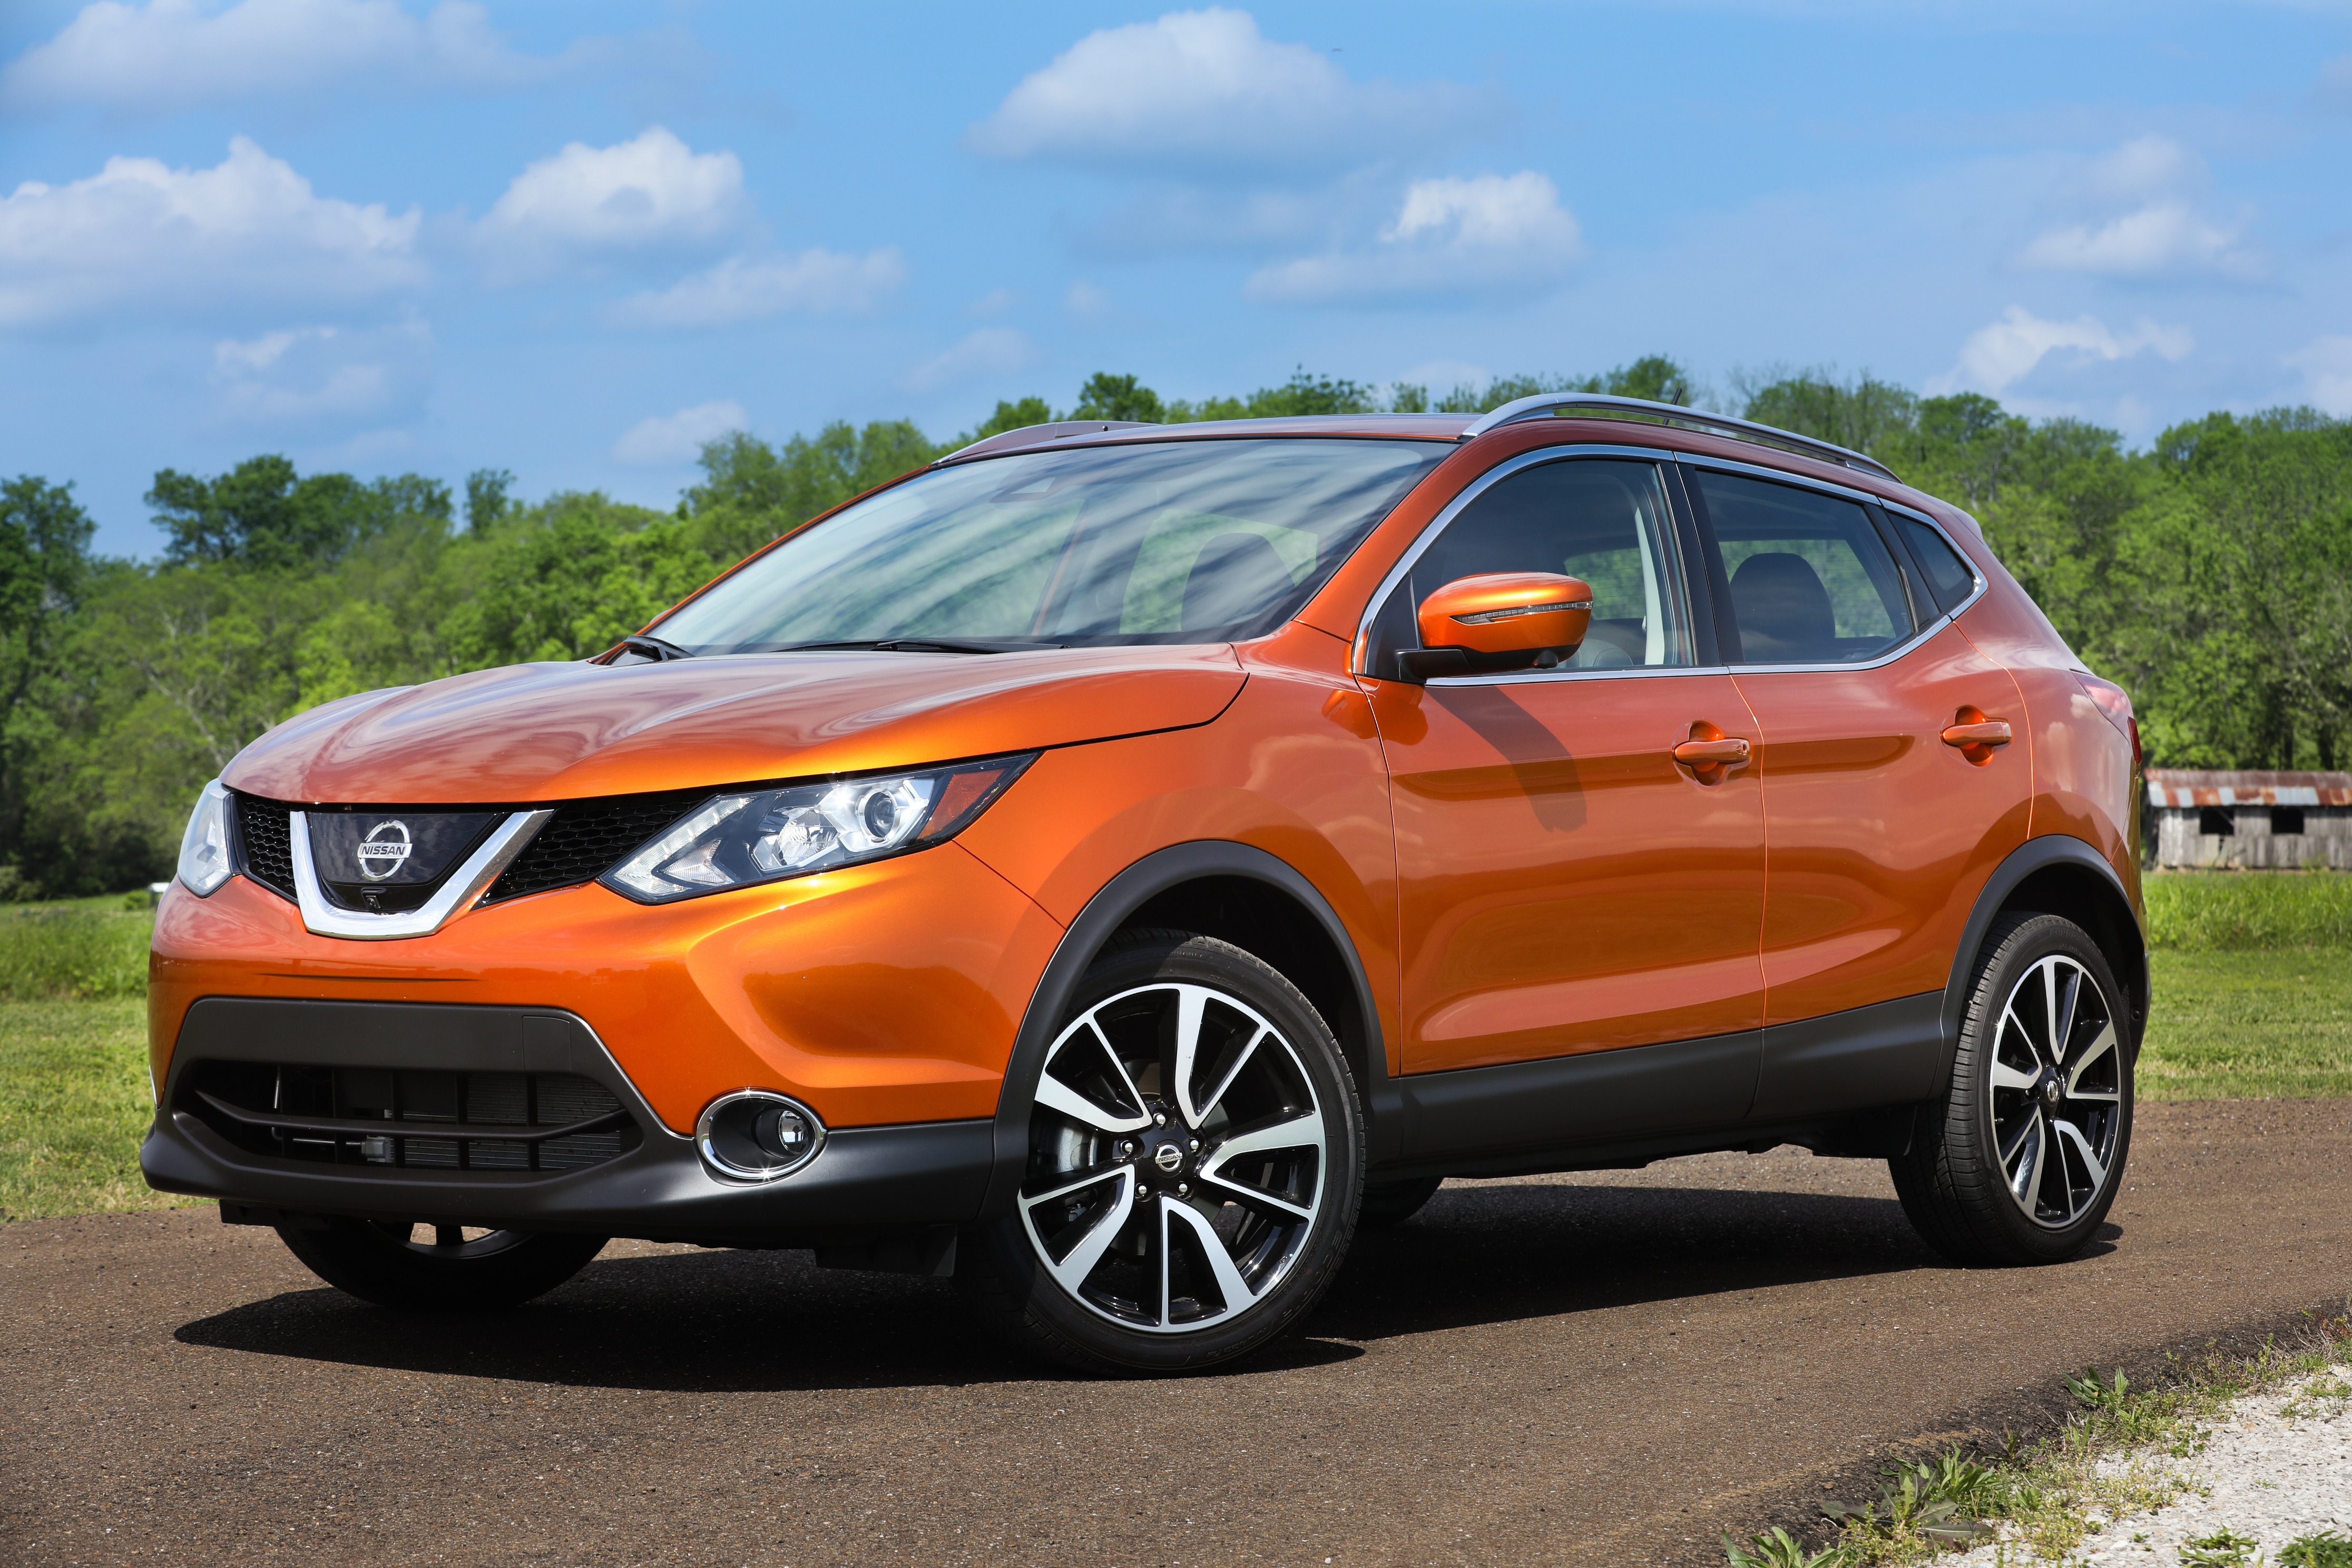 2017 Nissan Rogue Sport SL AWD Platinum: The Shrink-to-Fit Rogue